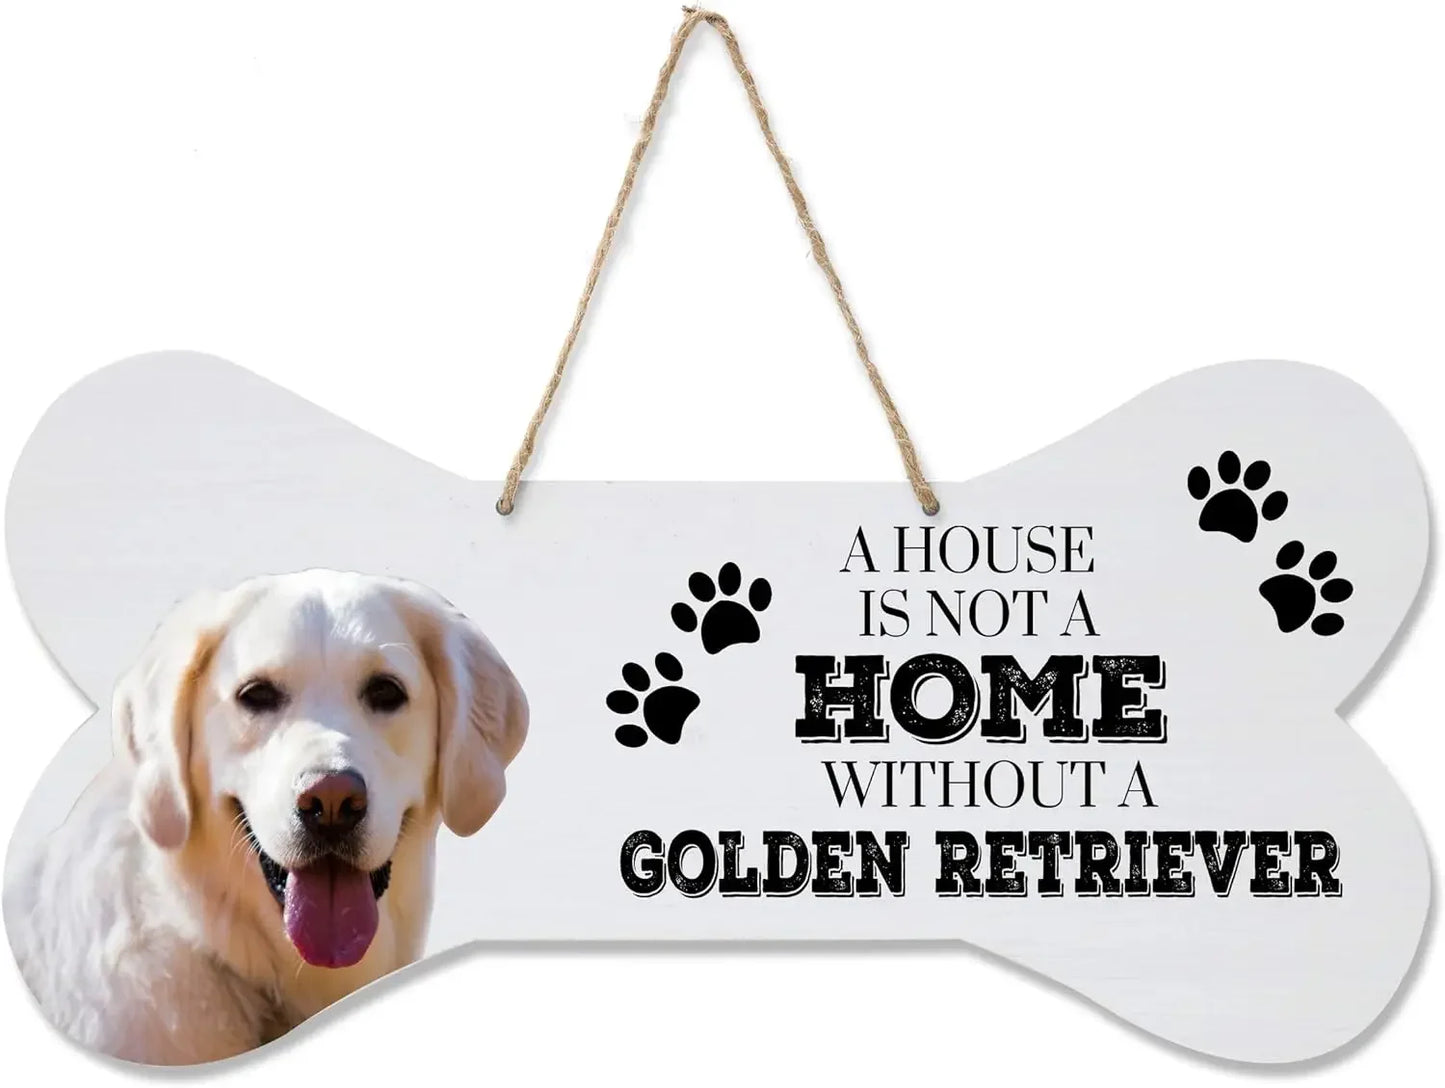 Home is Where My Dog is Pet Quote Dog Bone Wall Wooden Hanging Signs Dog Lovers Gifts for Women Dog Owner Gift for Home Decor